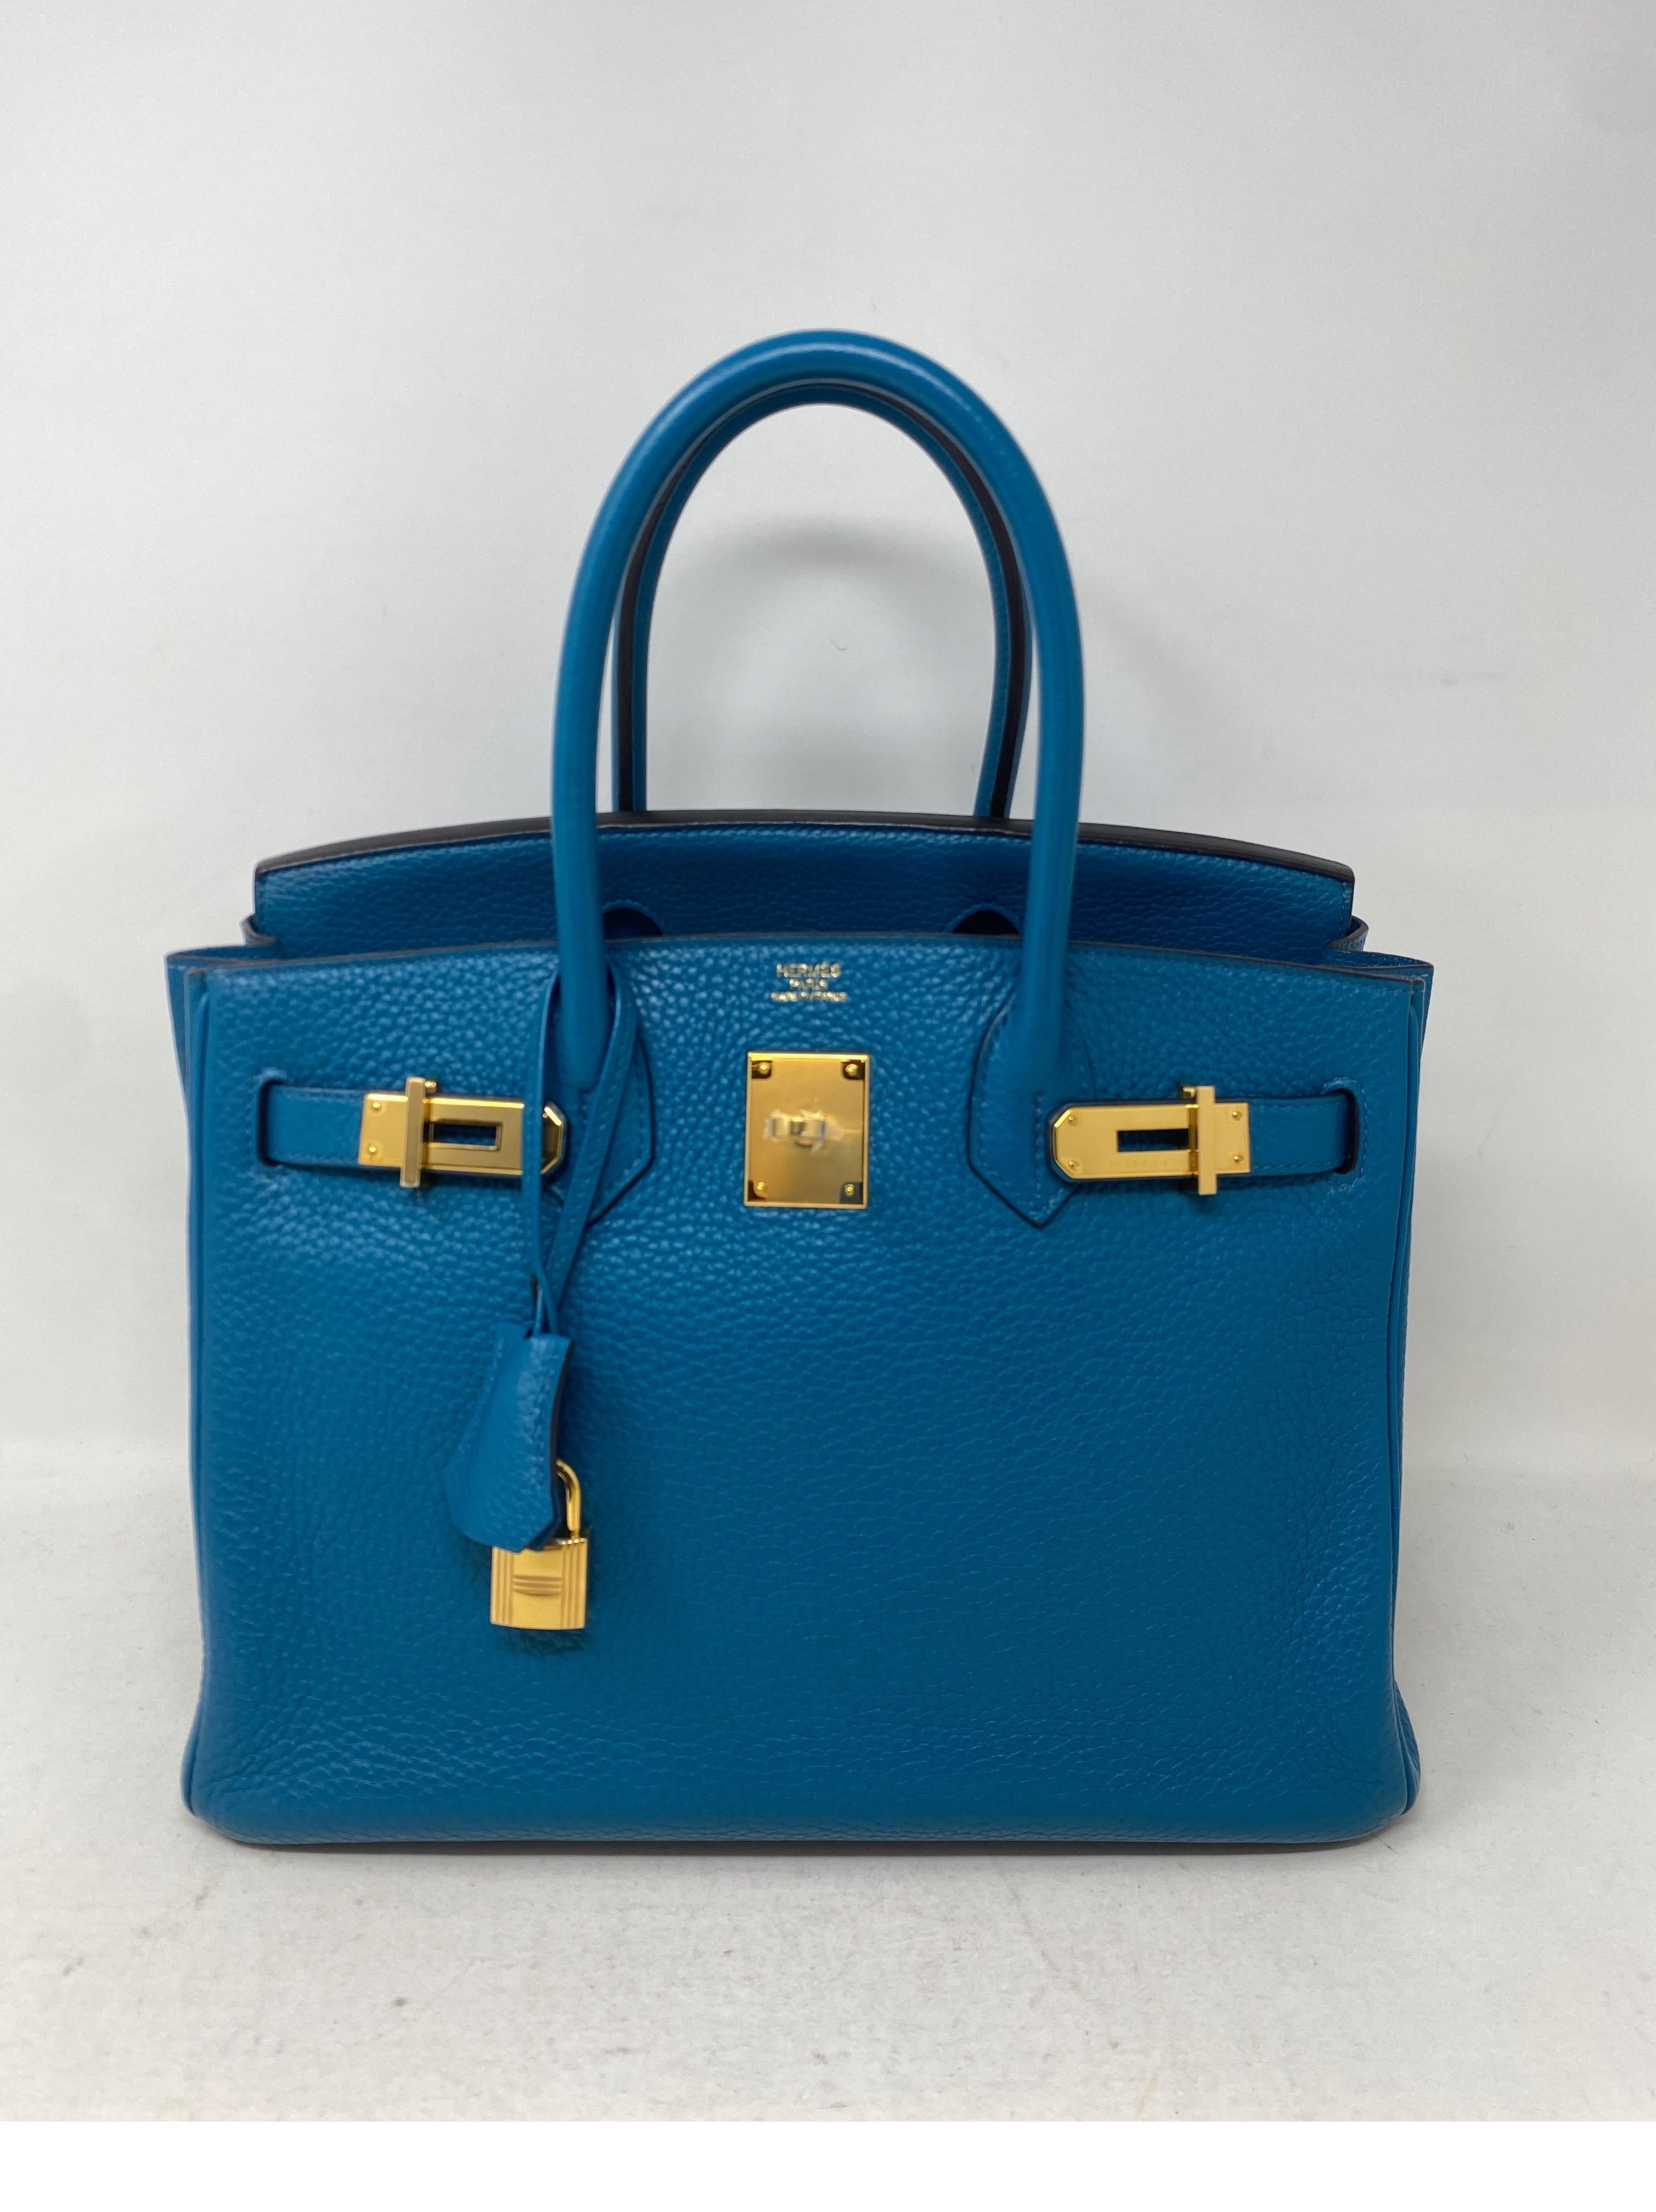 Hermes Blue Cobalt Birkin 30 Bag. Excellent condition. Blue clemence leather. Gold hardware. Still has plastic on hardware. Interior clean. R stamp. Includes clochette, lock, keys, and dust bag. Guaranteed authentic. 